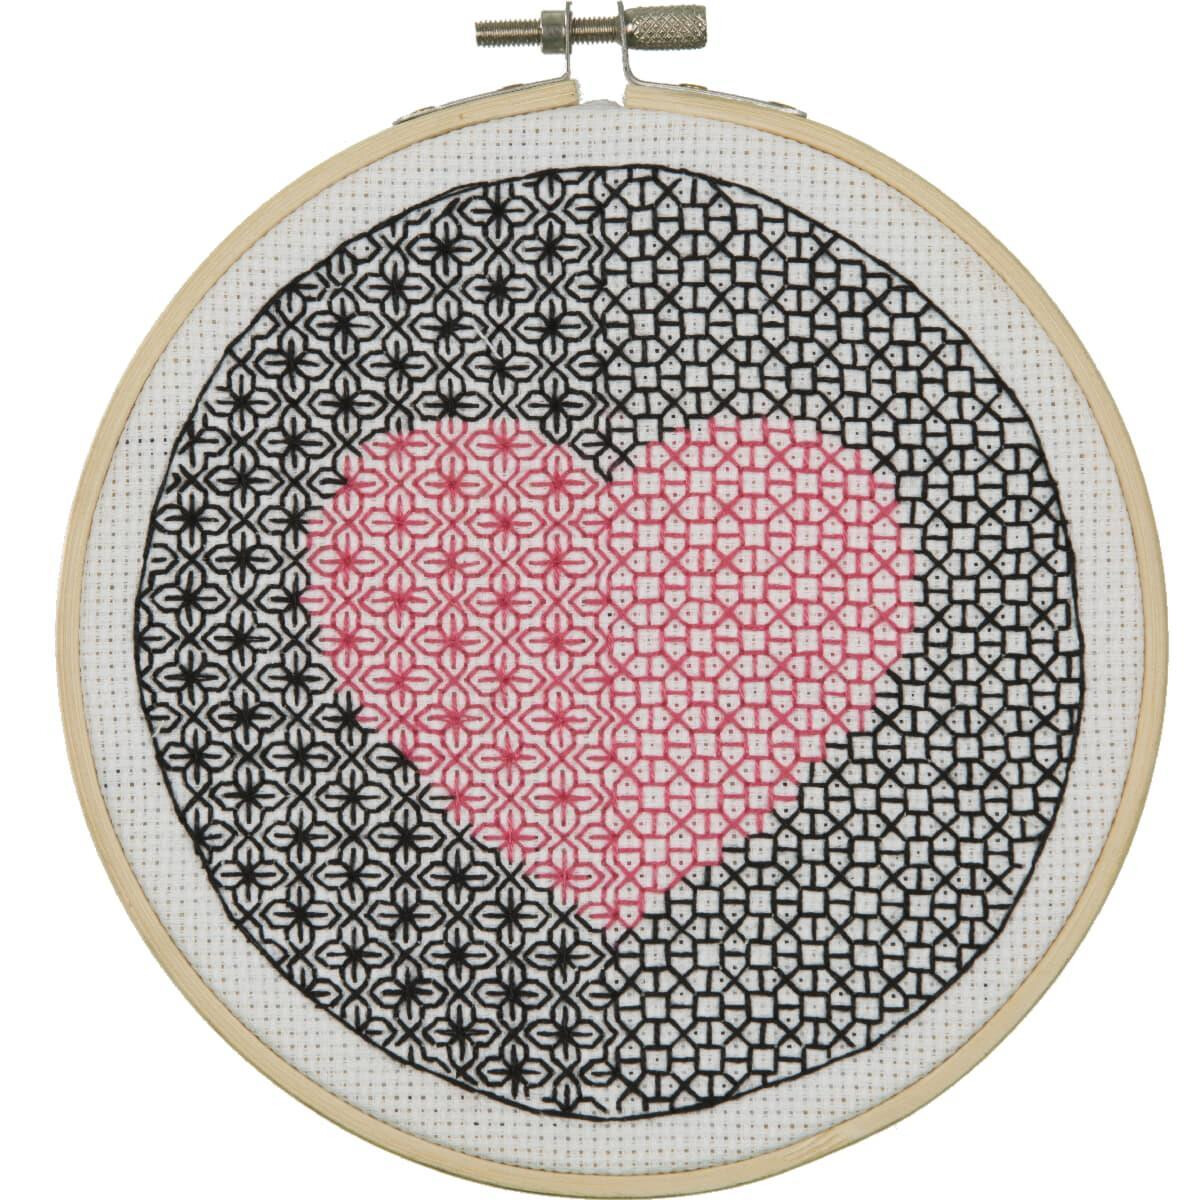 Anchor counted blackwork stitch kit "Heart",...